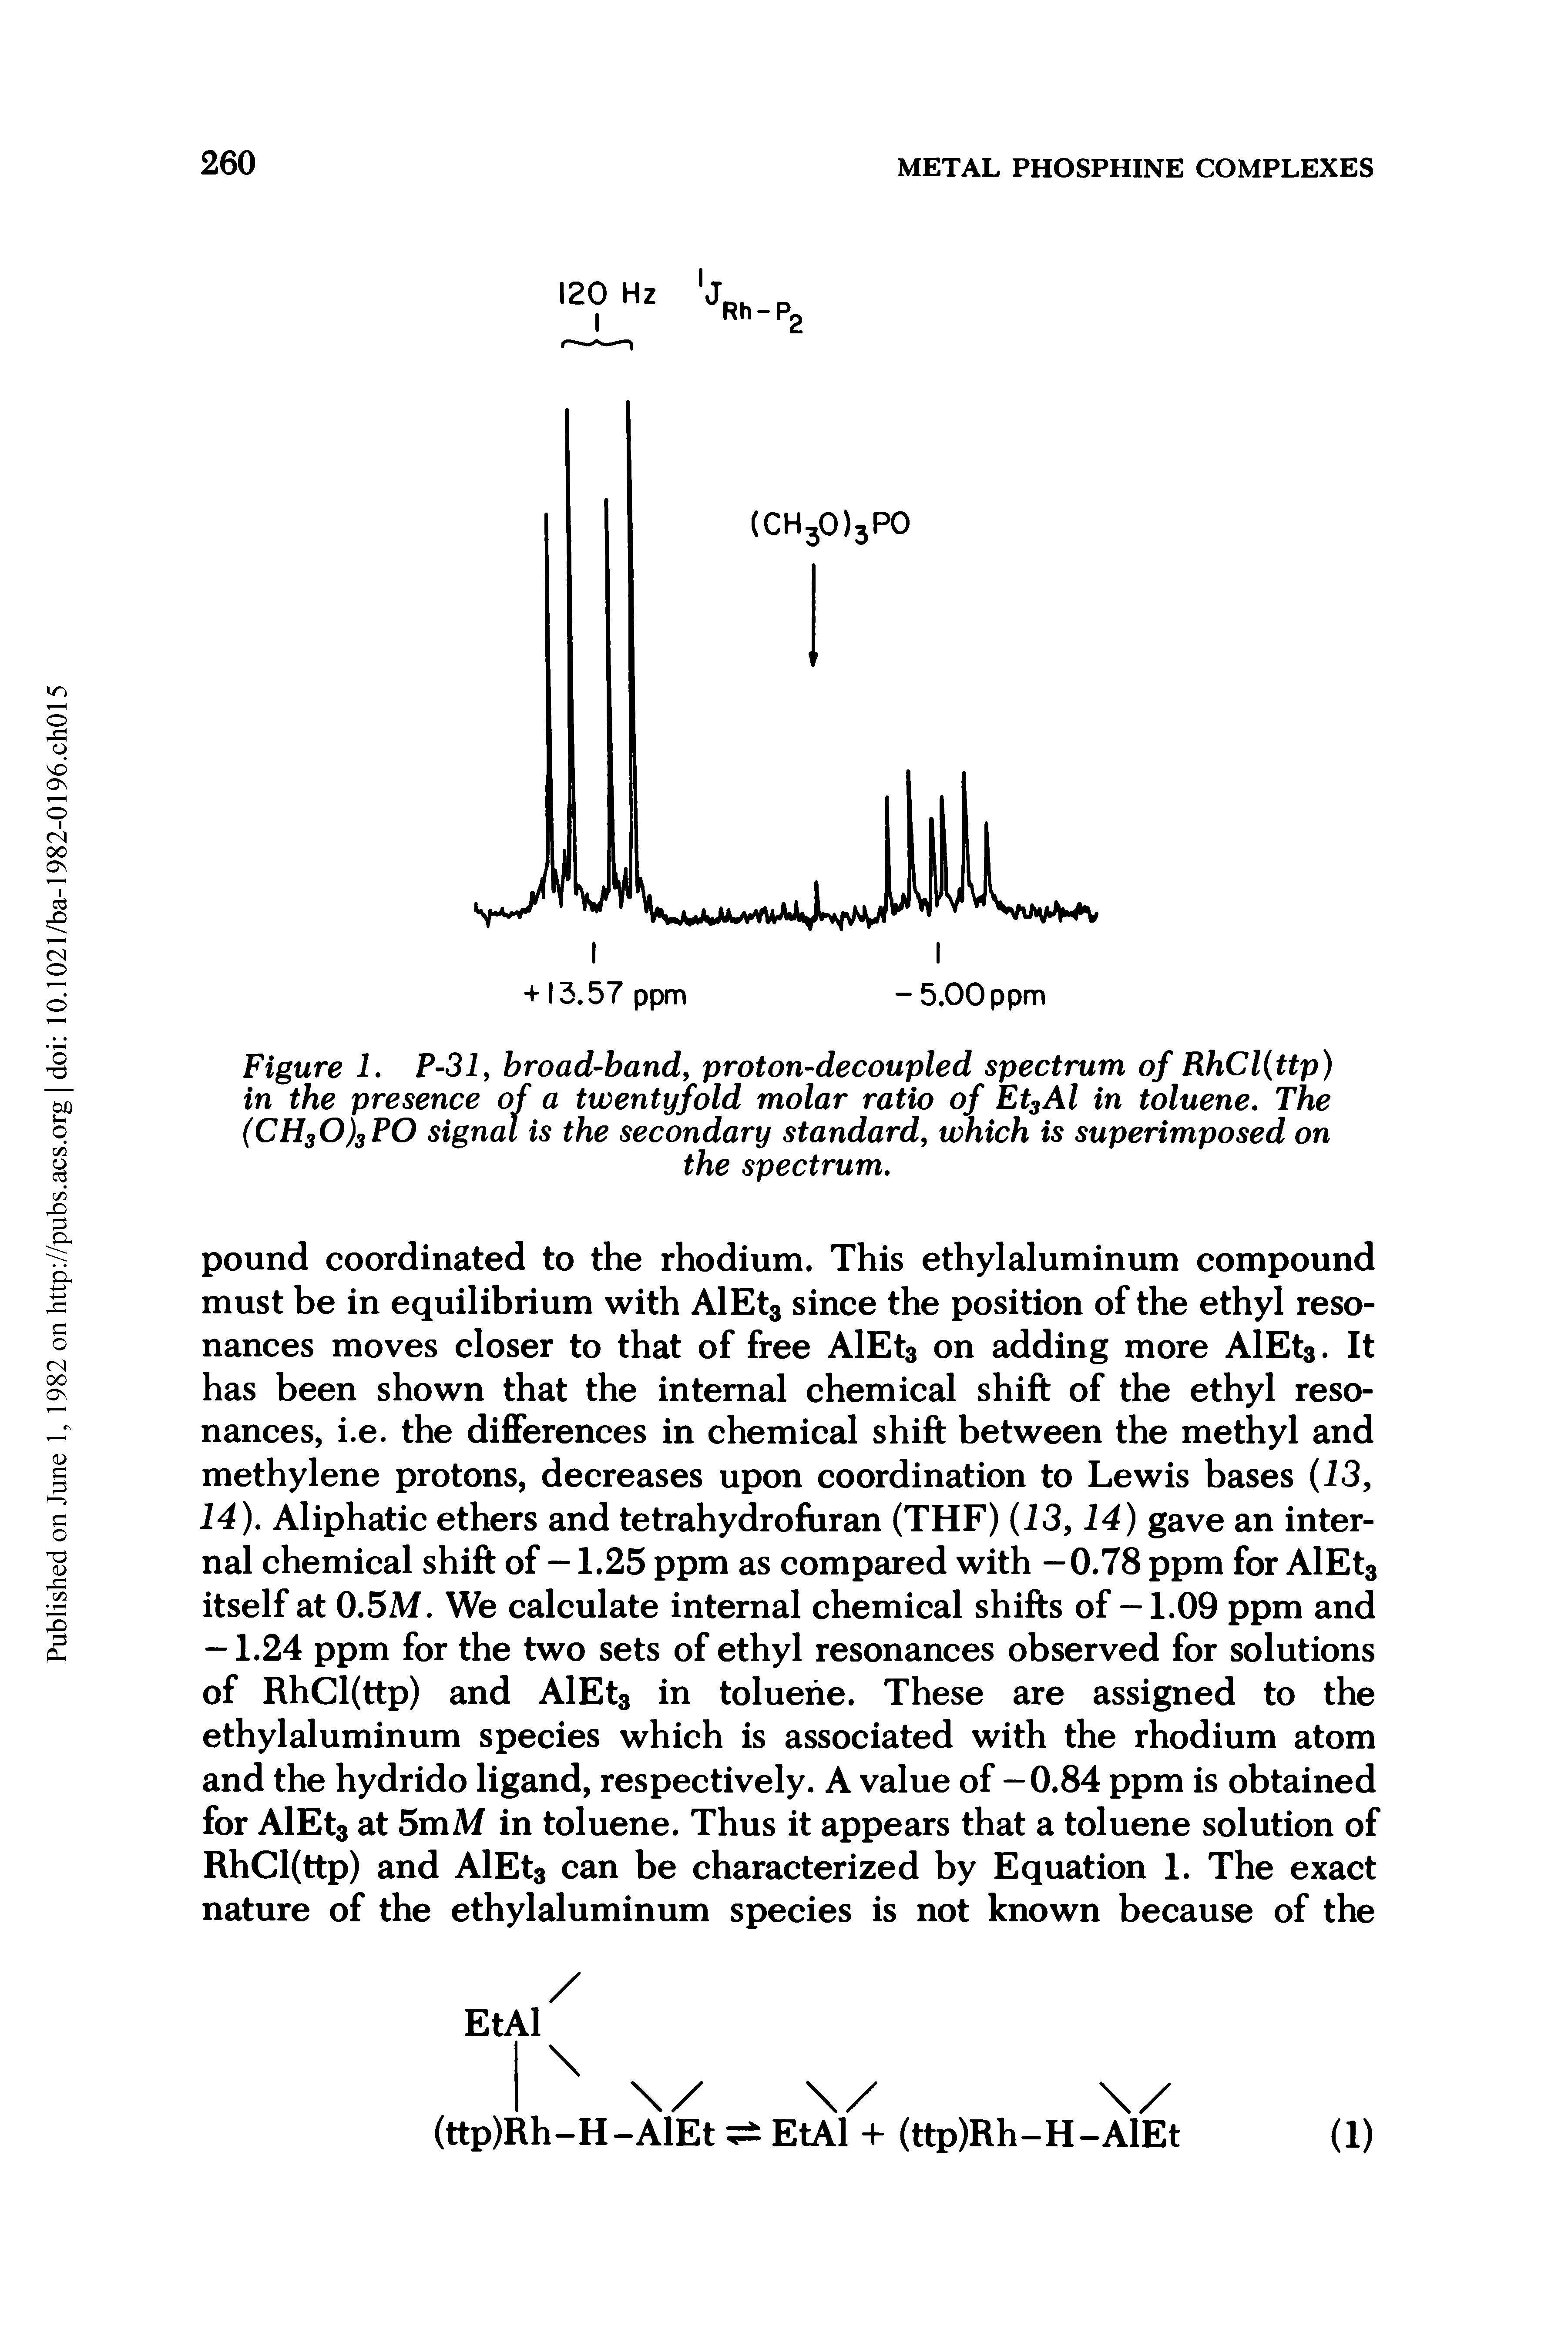 Figure 1. P-31, broad-hand, proton-decoupled spectrum of RhCl(ttp) in the presence of a twentyfold molar ratio of Et3Al in toluene. The (CH30)3P0 signal is the secondary standard, which is superimposed on...